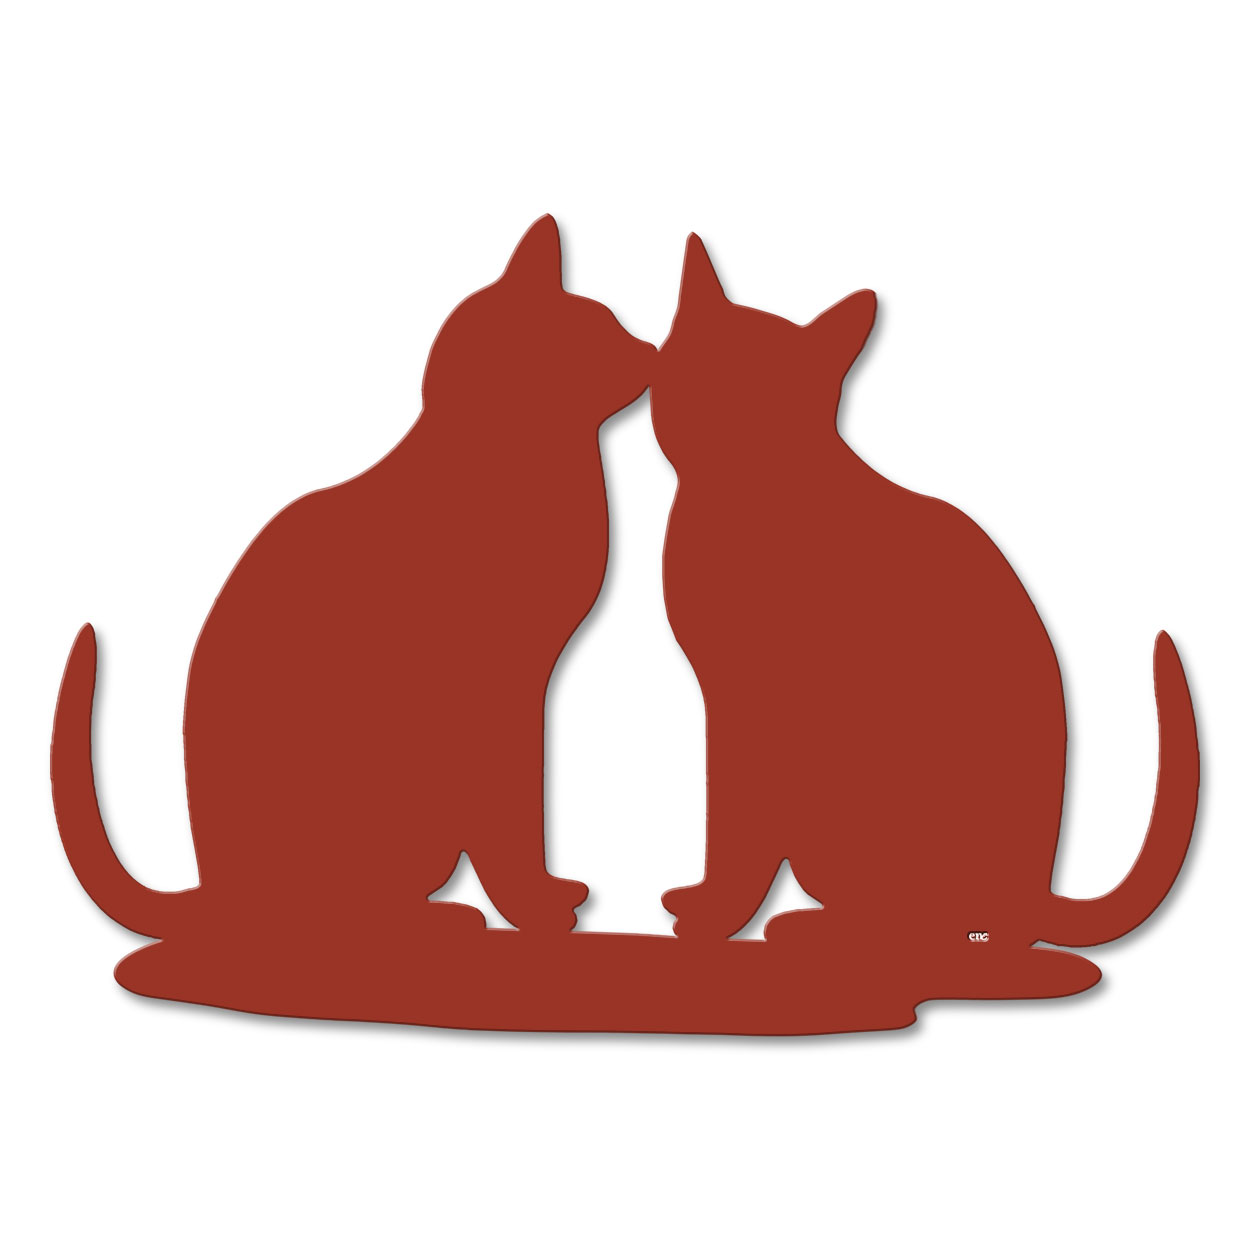 625453 - 18 or 24in Metal Wall Art - Two Cats - Choose Color